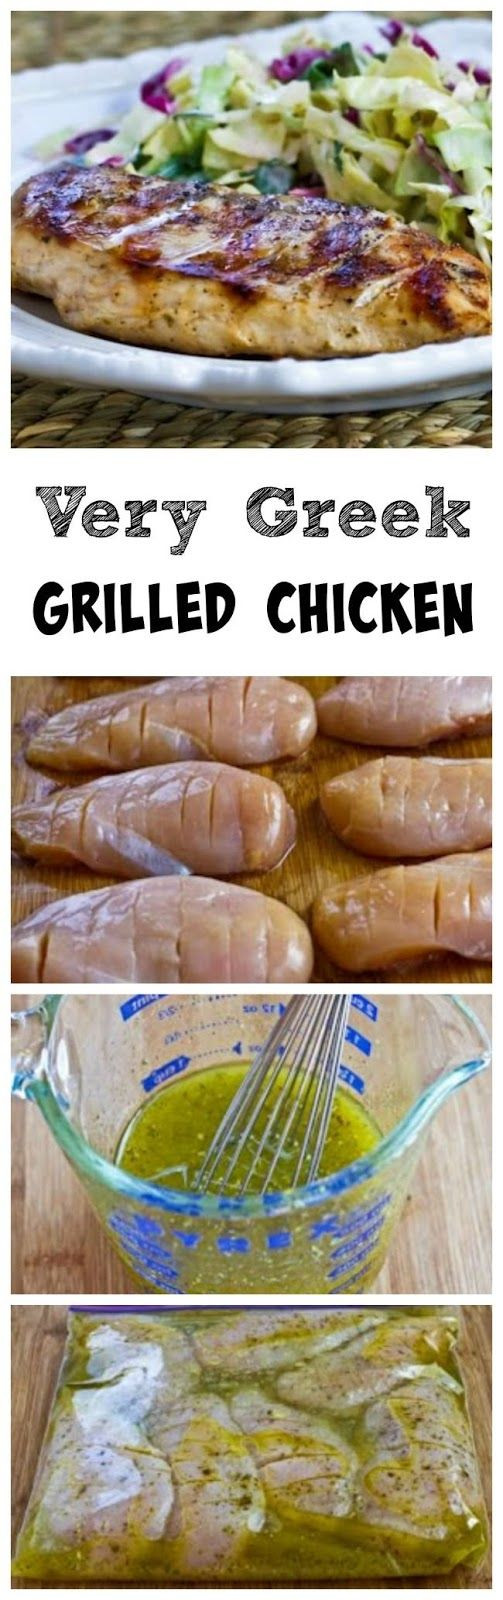 Low Calorie Grilled Chicken Recipes
 Very Greek Grilled Chicken